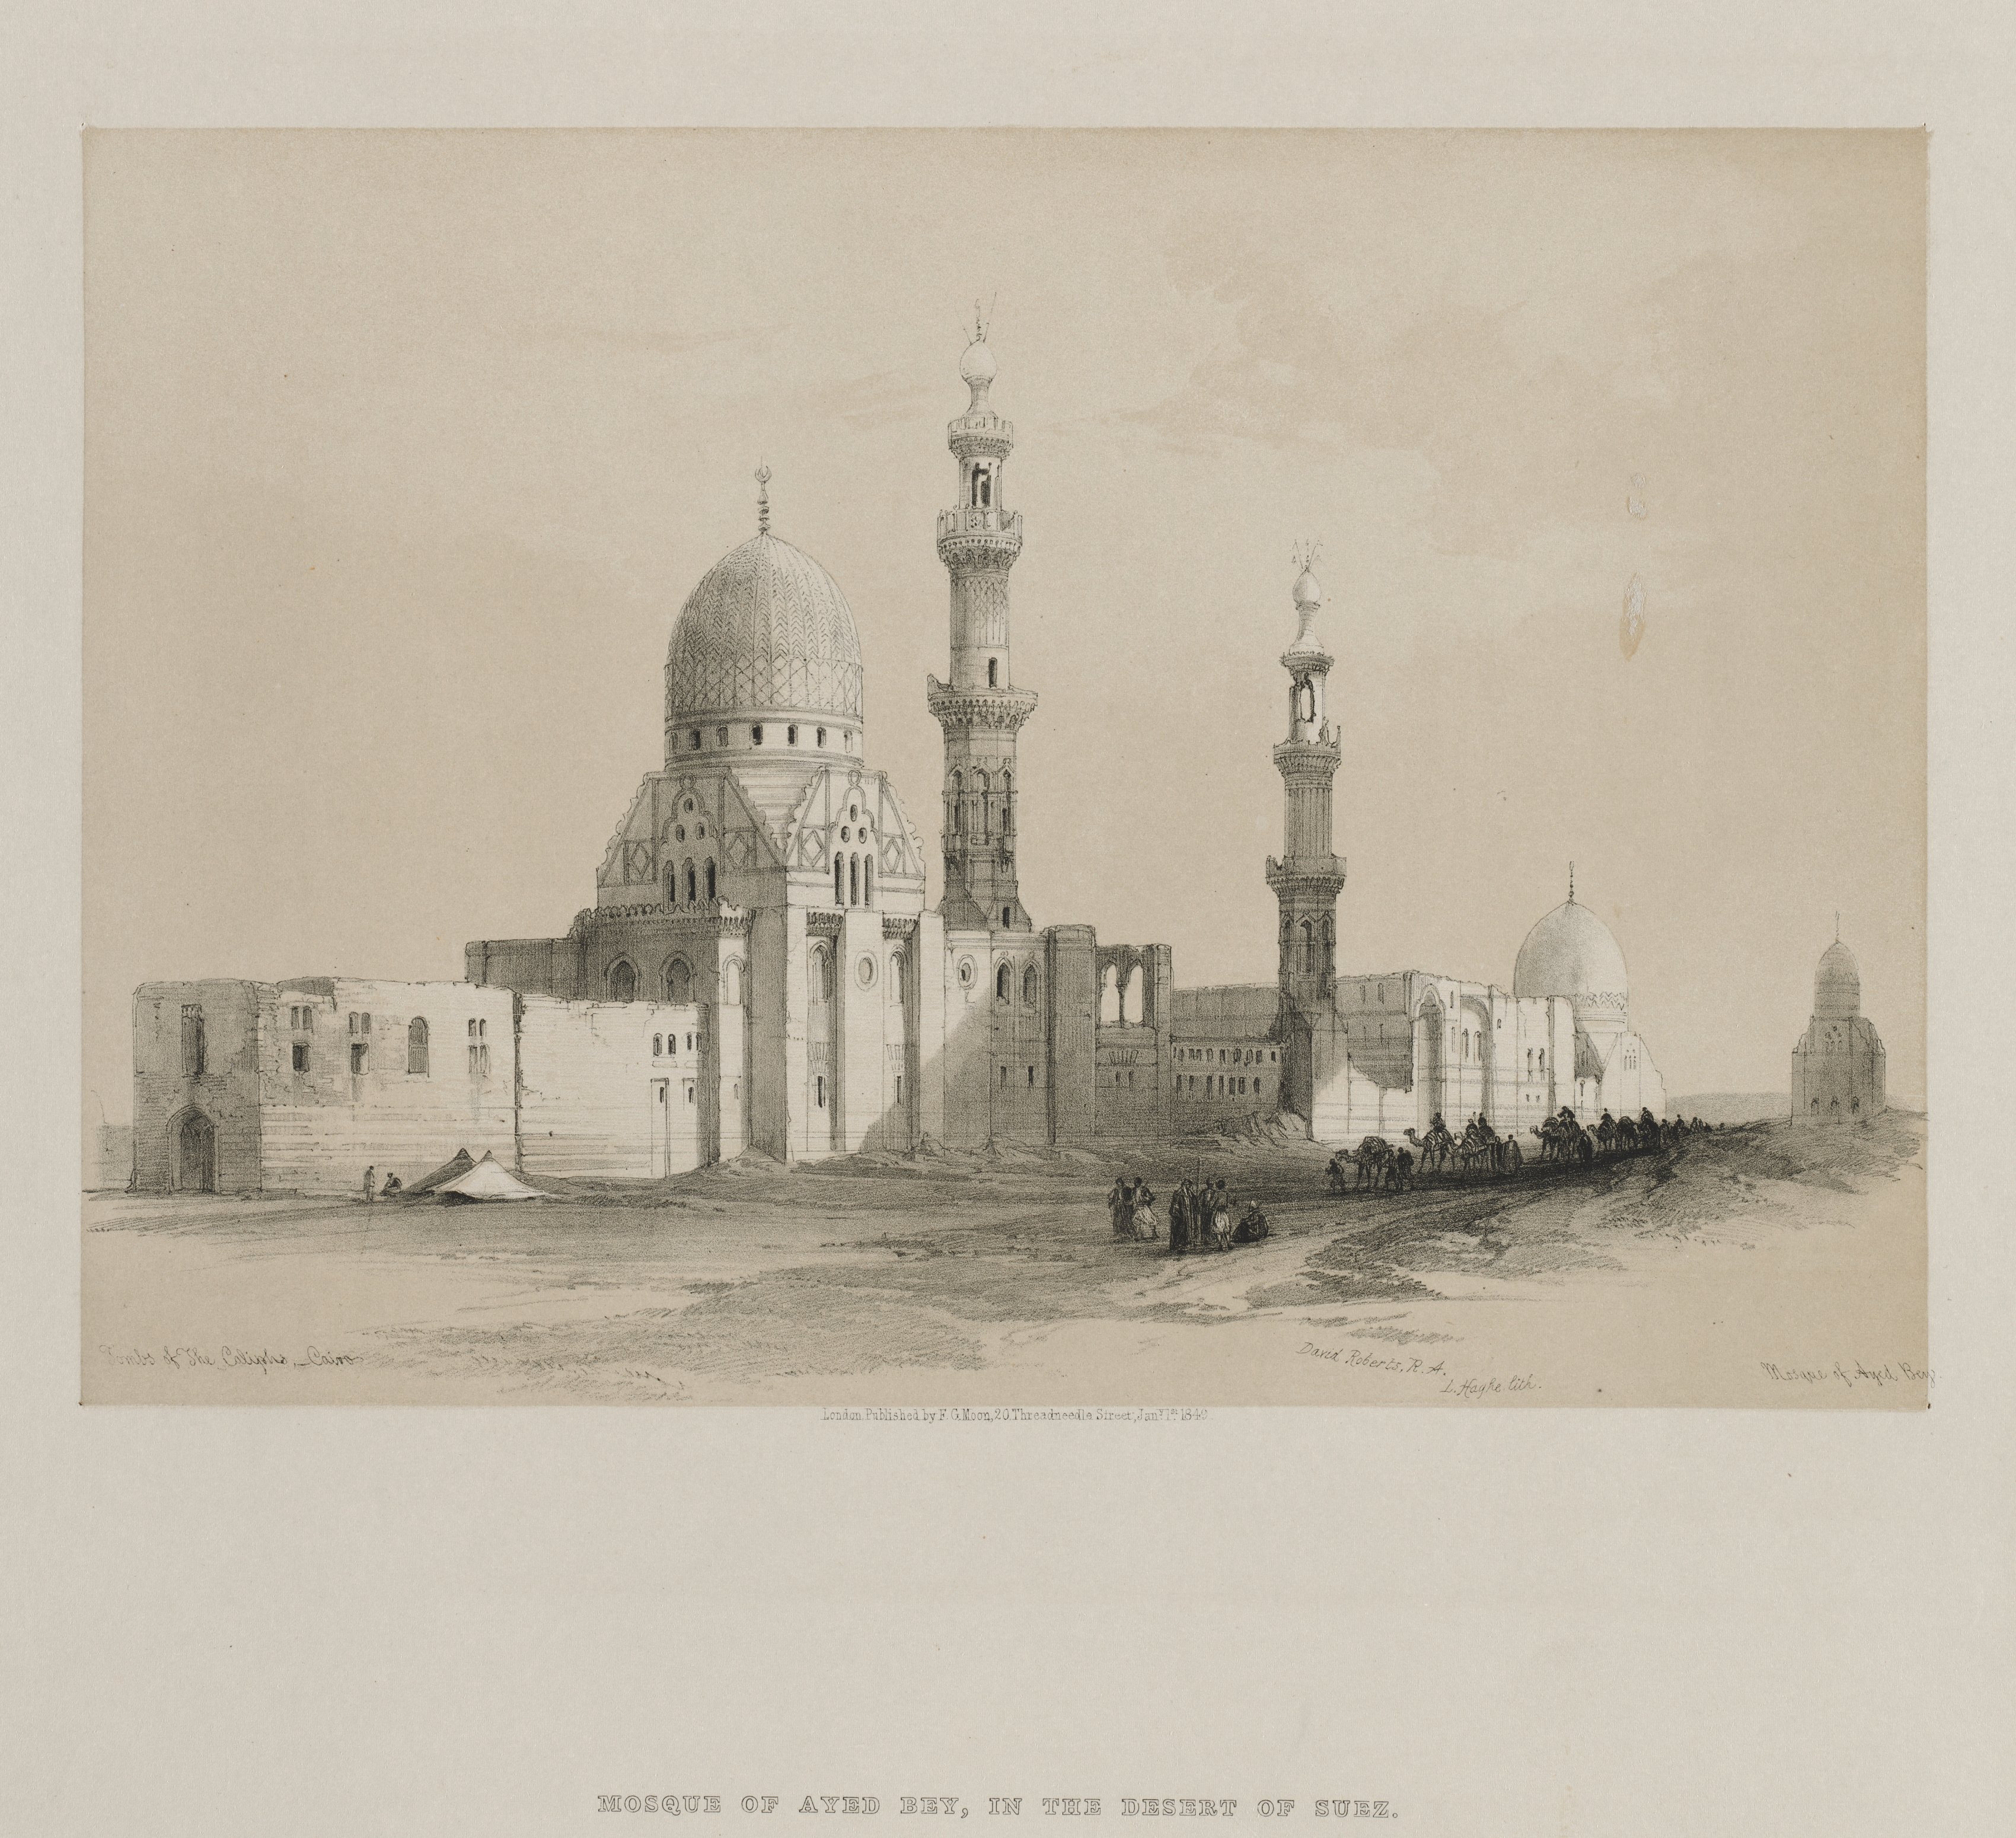 Egypt and Nubia, Volume III: Tombs of the Caliphs-Cairo.  Mosque of Ayed Be[y]